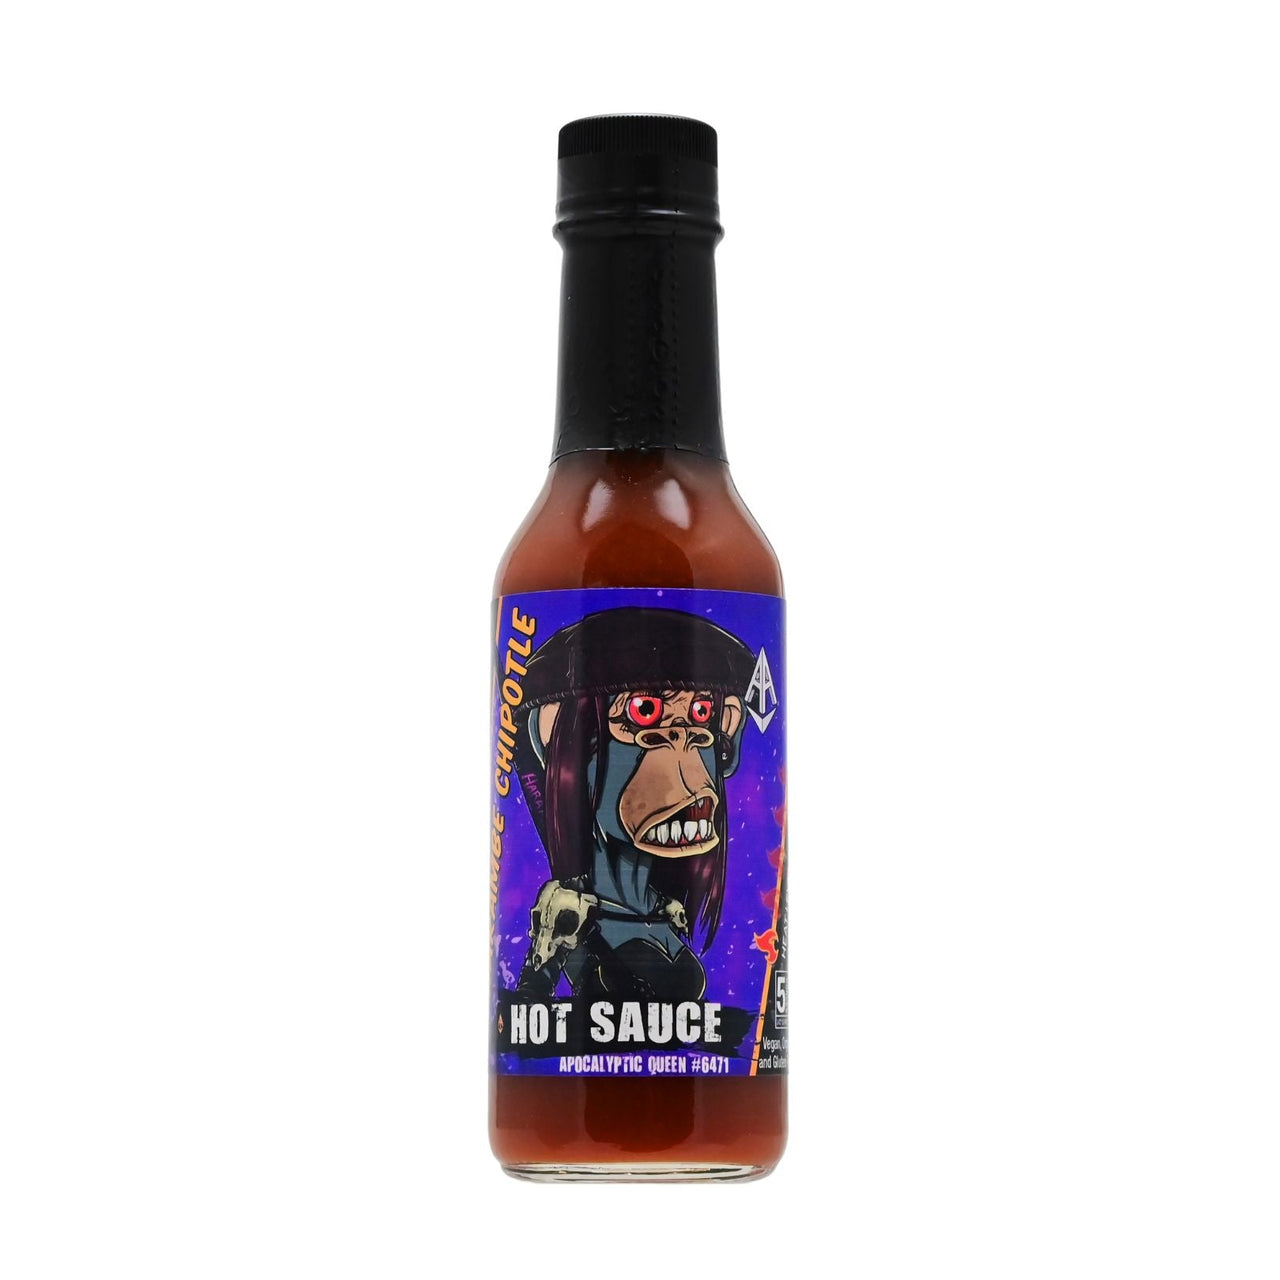 Apocalyptic Queen #6471 Harambe Chipotle Hot Sauce